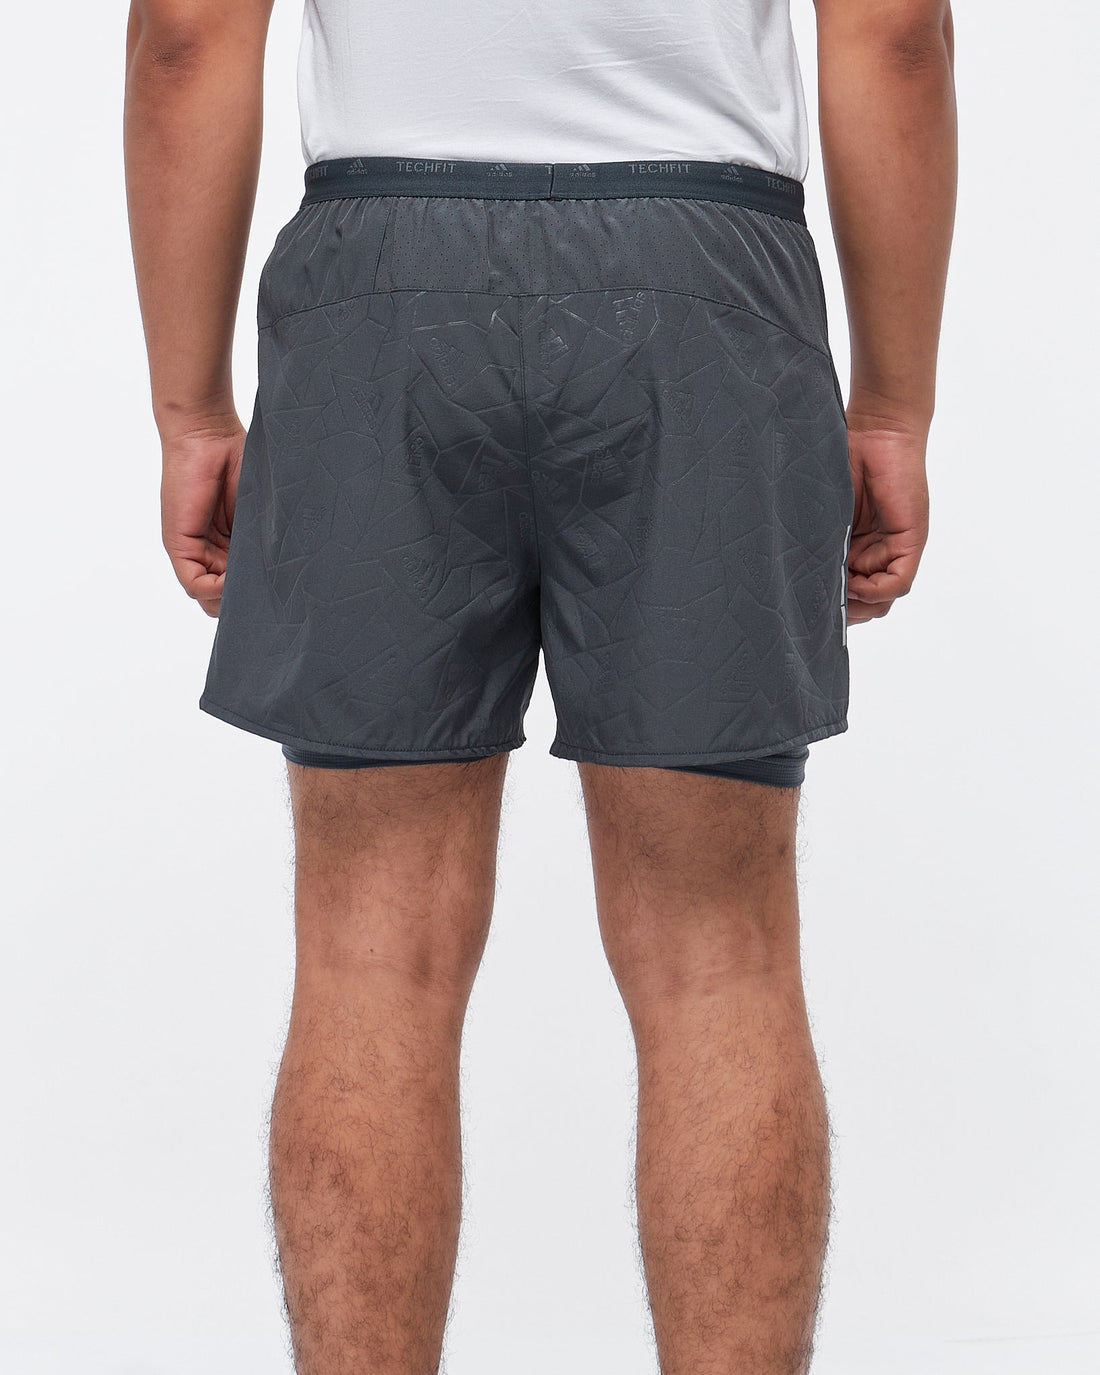 MOI OUTFIT-AD Lightweight 2 in 1 Men Sport Shorts 13.90